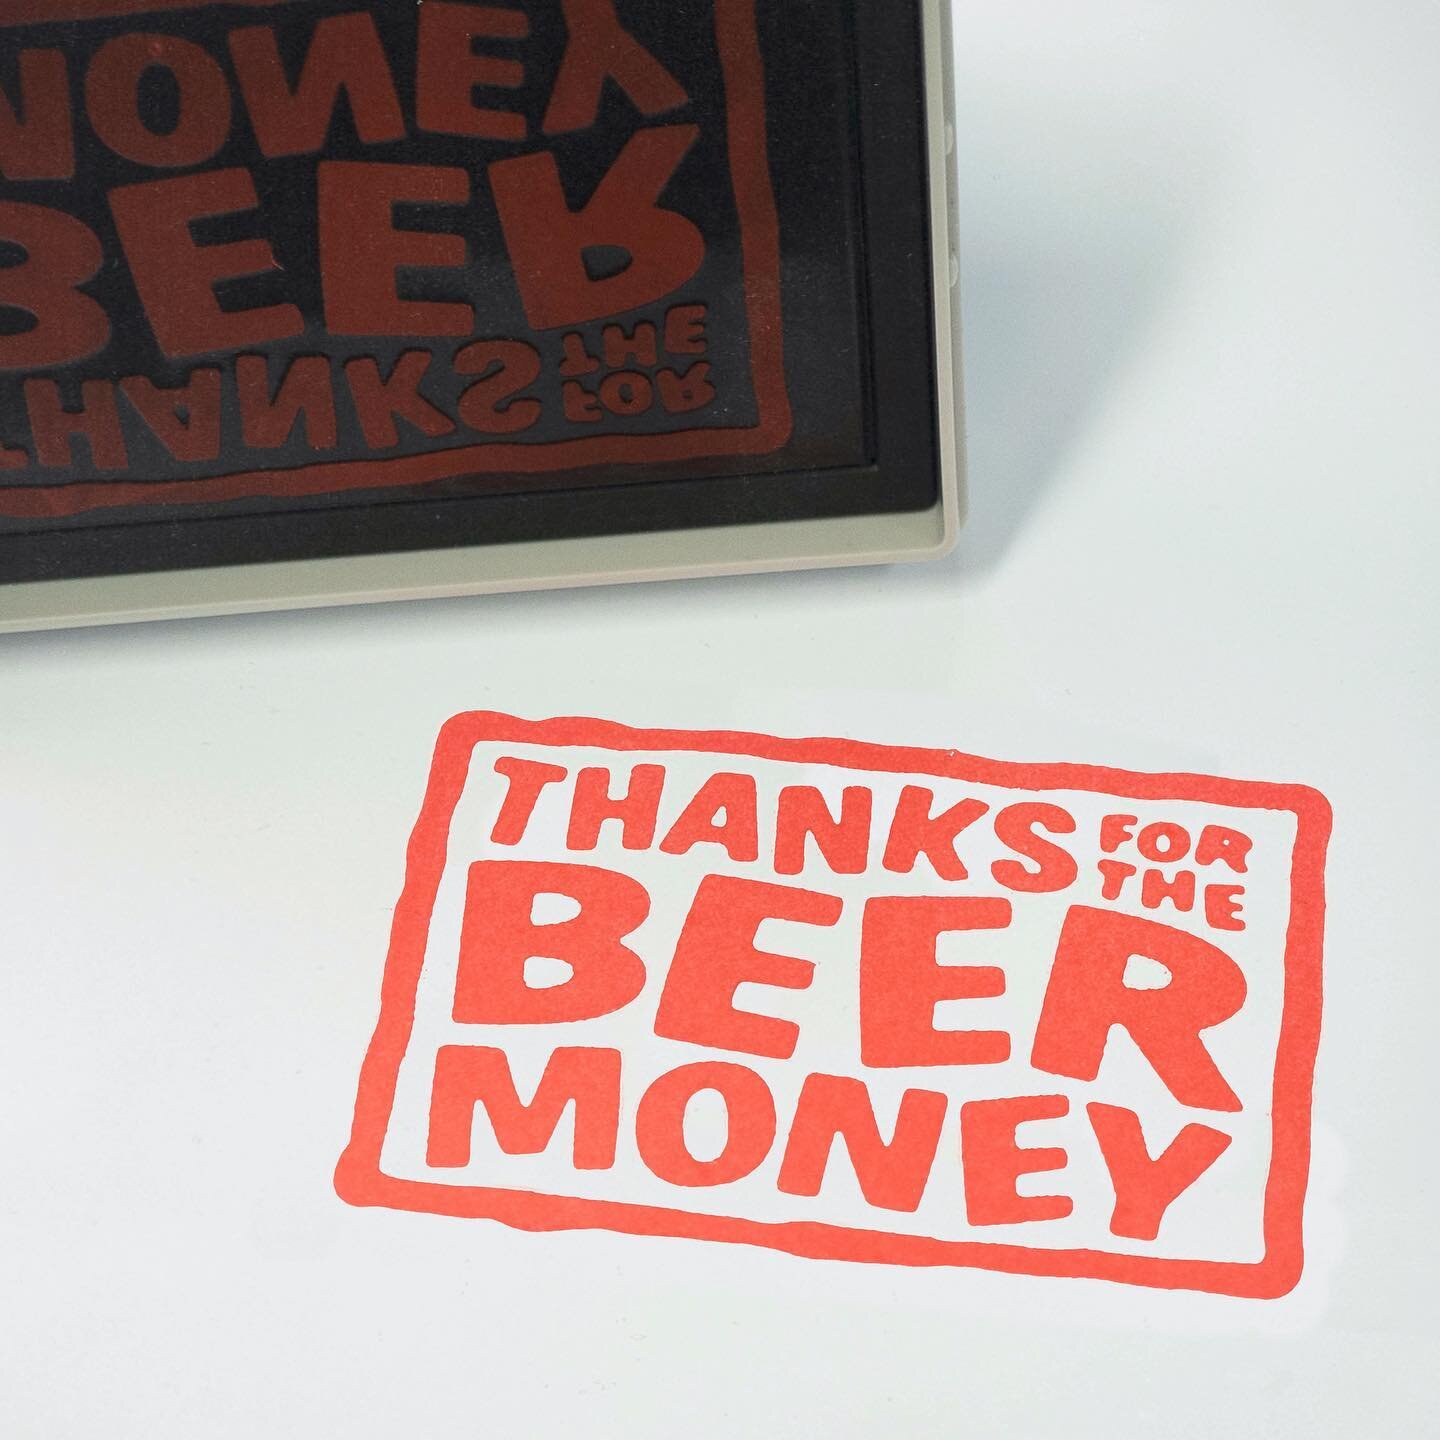 THANKS FOR THE BEER MONEY
New stamp going onto all webstore order-receipts this week. Mixing it up. Including the CHEAP DRUNK presale-tees which are fiinnnalllllly ready. I&rsquo;ve also got ass-loads of stickers, I&rsquo;ve gone fuckin bonkers with 